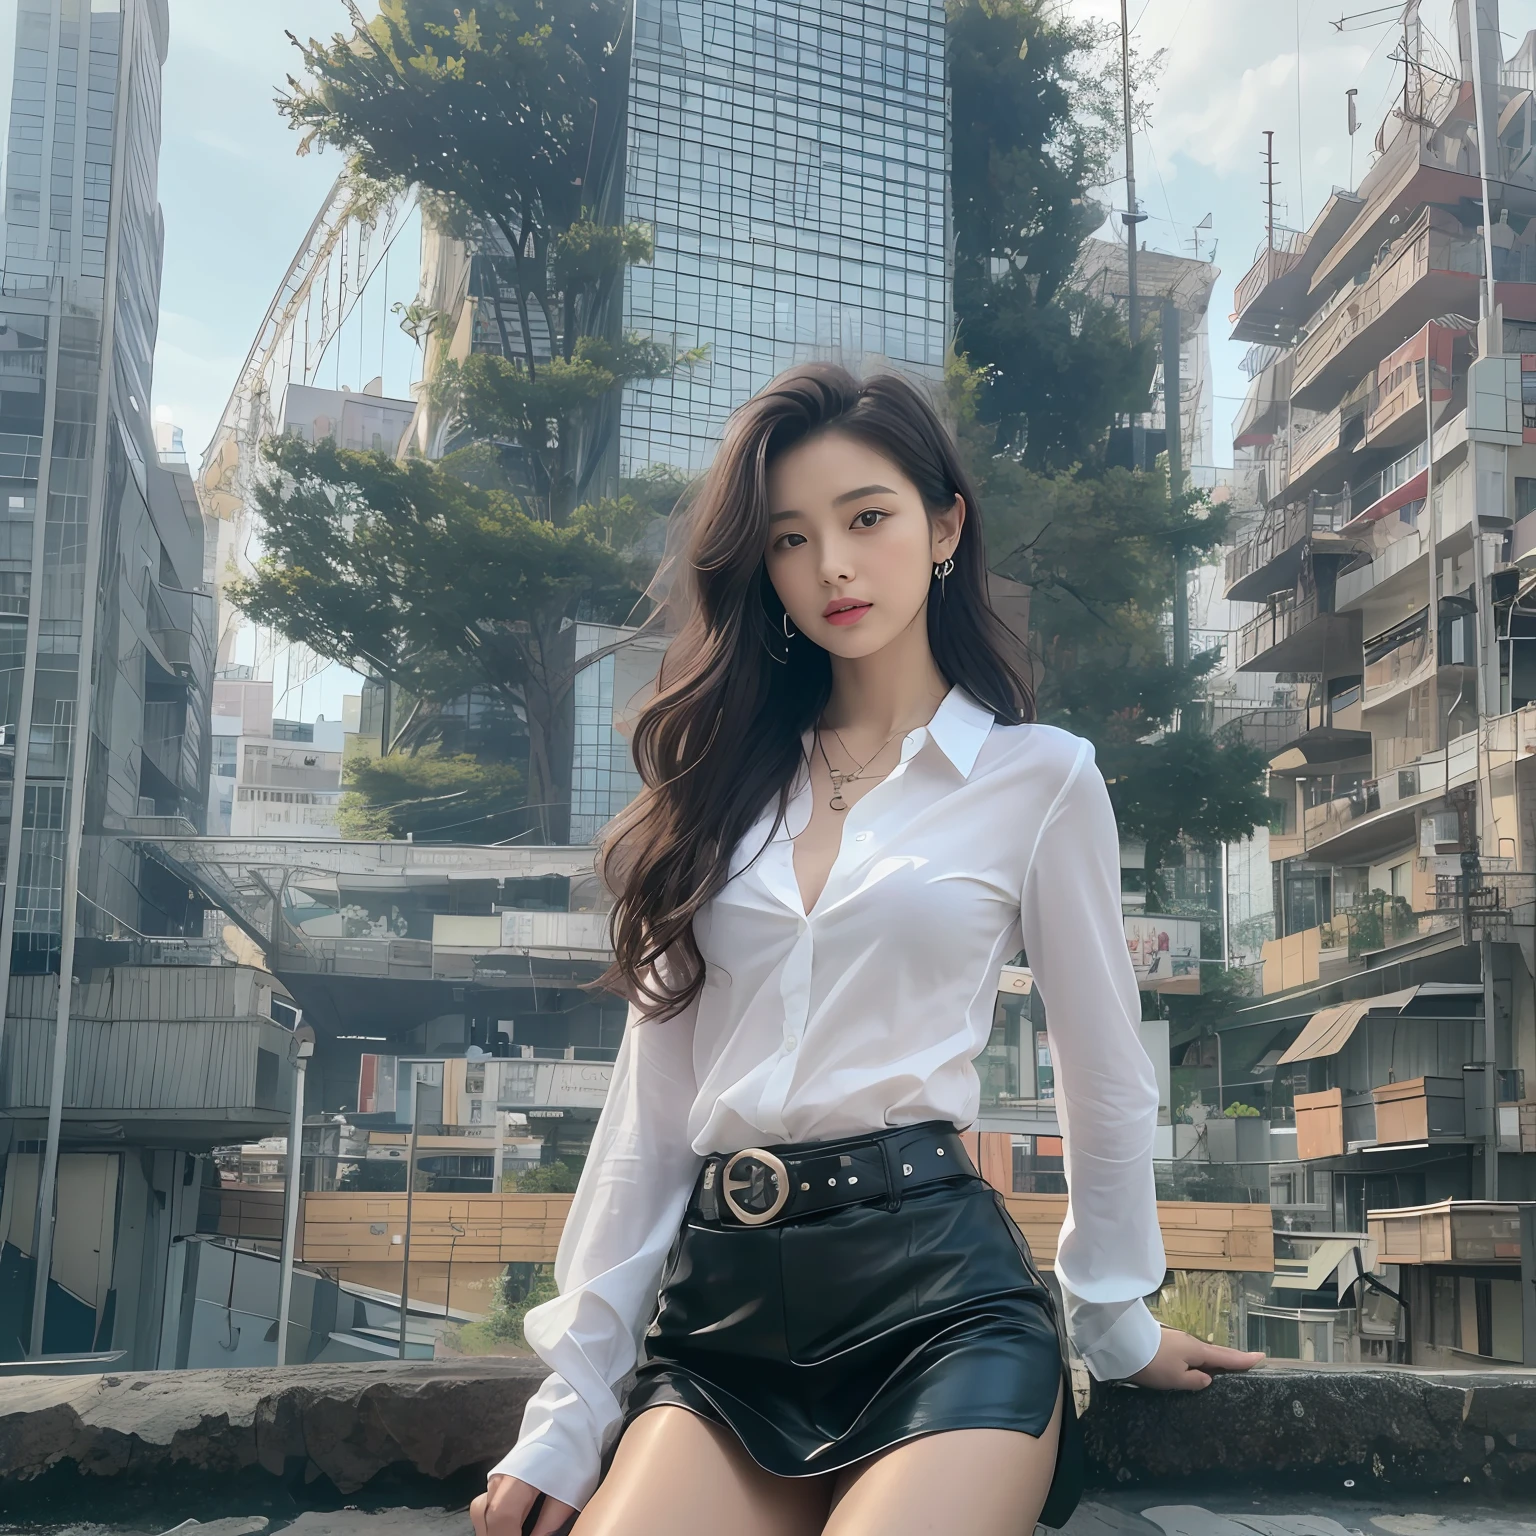 (top-quality、hight resolution、​masterpiece:1.3)、Tall and cute woman、Slender Abs、Dark brown hair styled in loose waves、breastsout、Wearing a pendant、White button-up shirt、a belt、Black leather tight skirt、(Modern architecture in background)、Details exquisitely rendered in the face and skin texture、A detailed eye、double eyelid